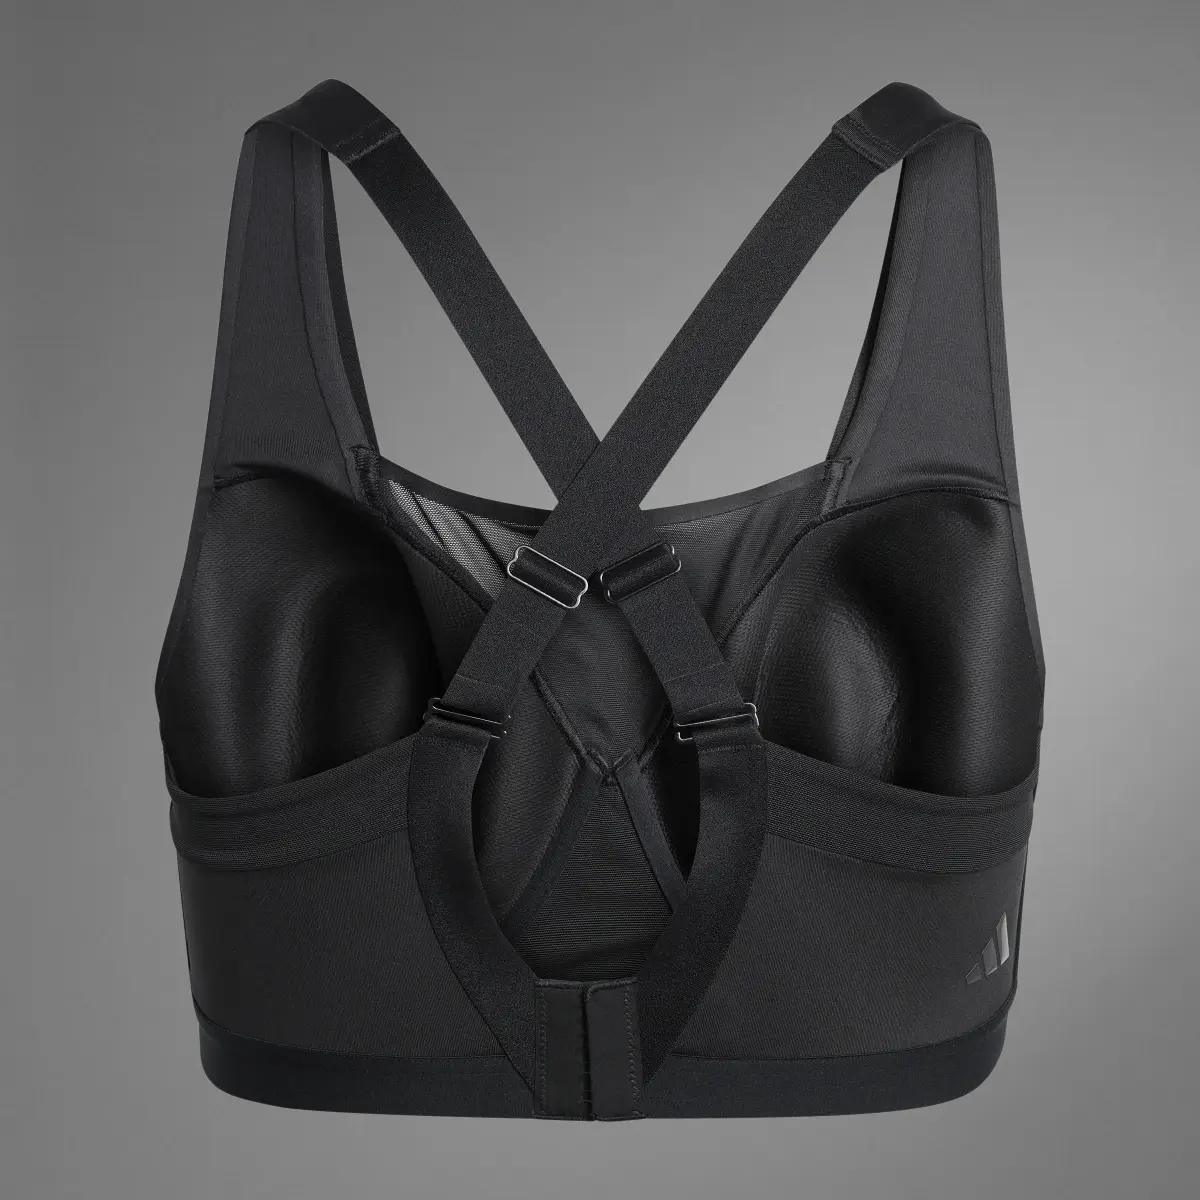 Adidas Brassière TLRD Impact Luxe Collective Power Maintien fort (Grandes tailles). 3